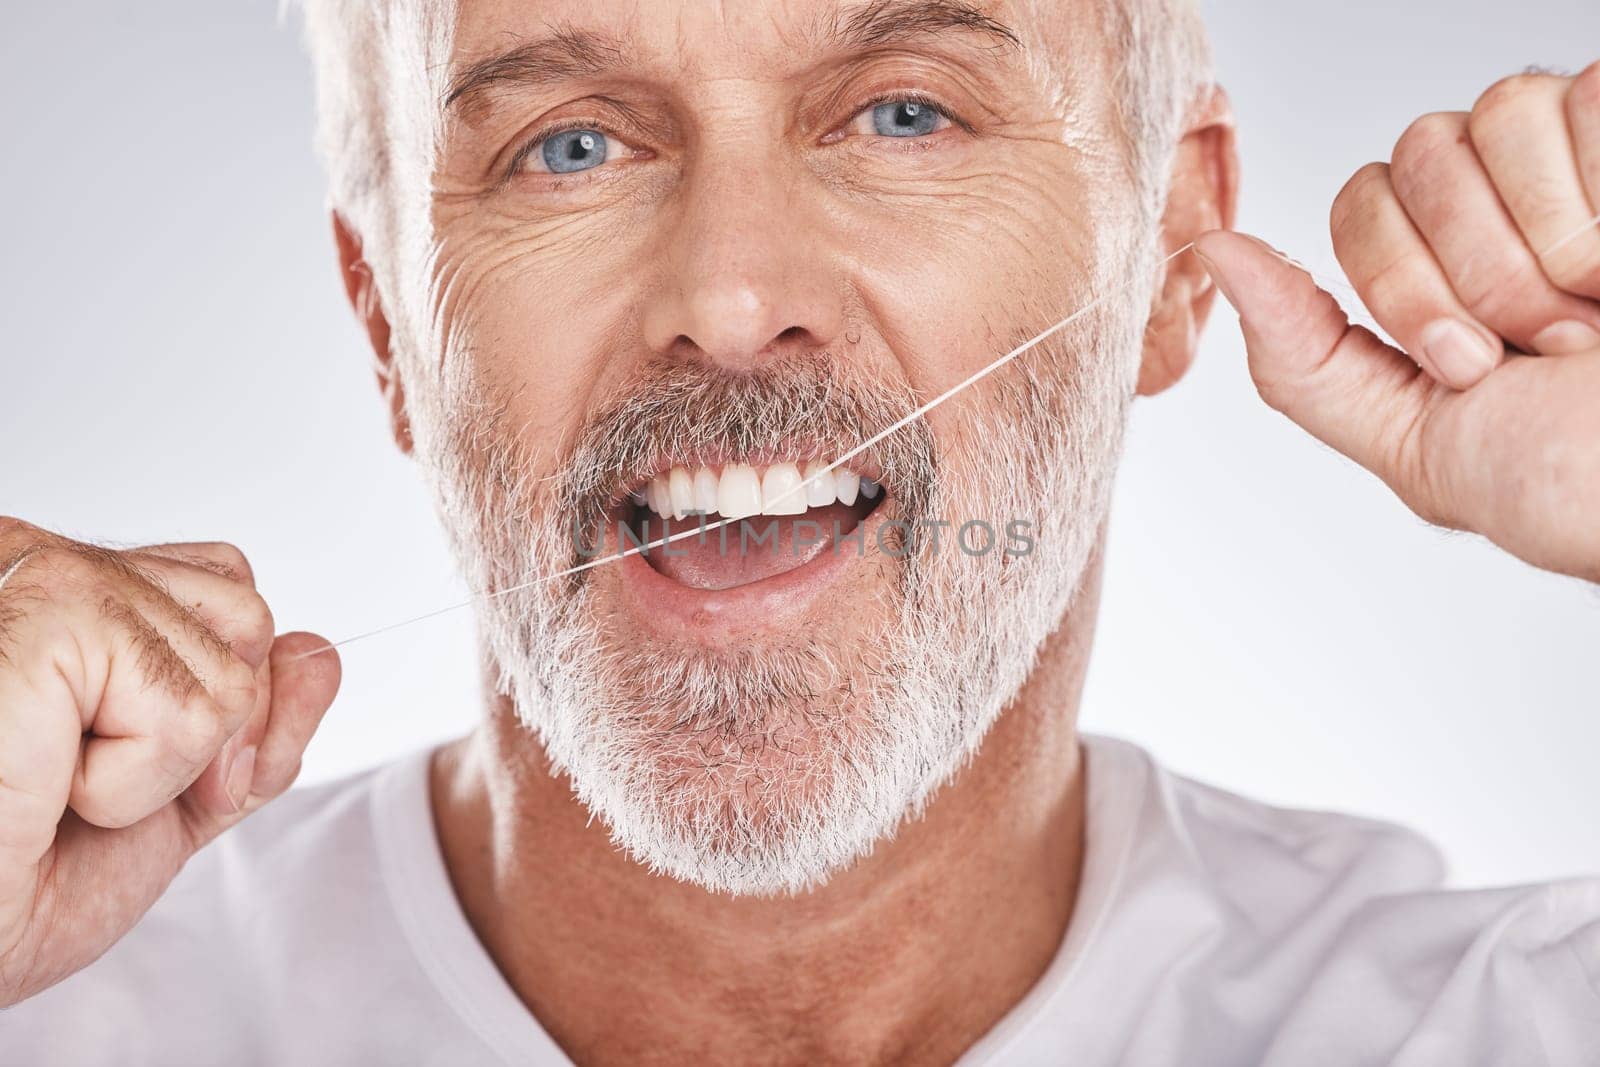 Dental, floss and face of senior man in studio isolated on a gray background. Portrait, cleaning or elderly male model with product flossing teeth for oral wellness, healthy gum hygiene or tooth care.